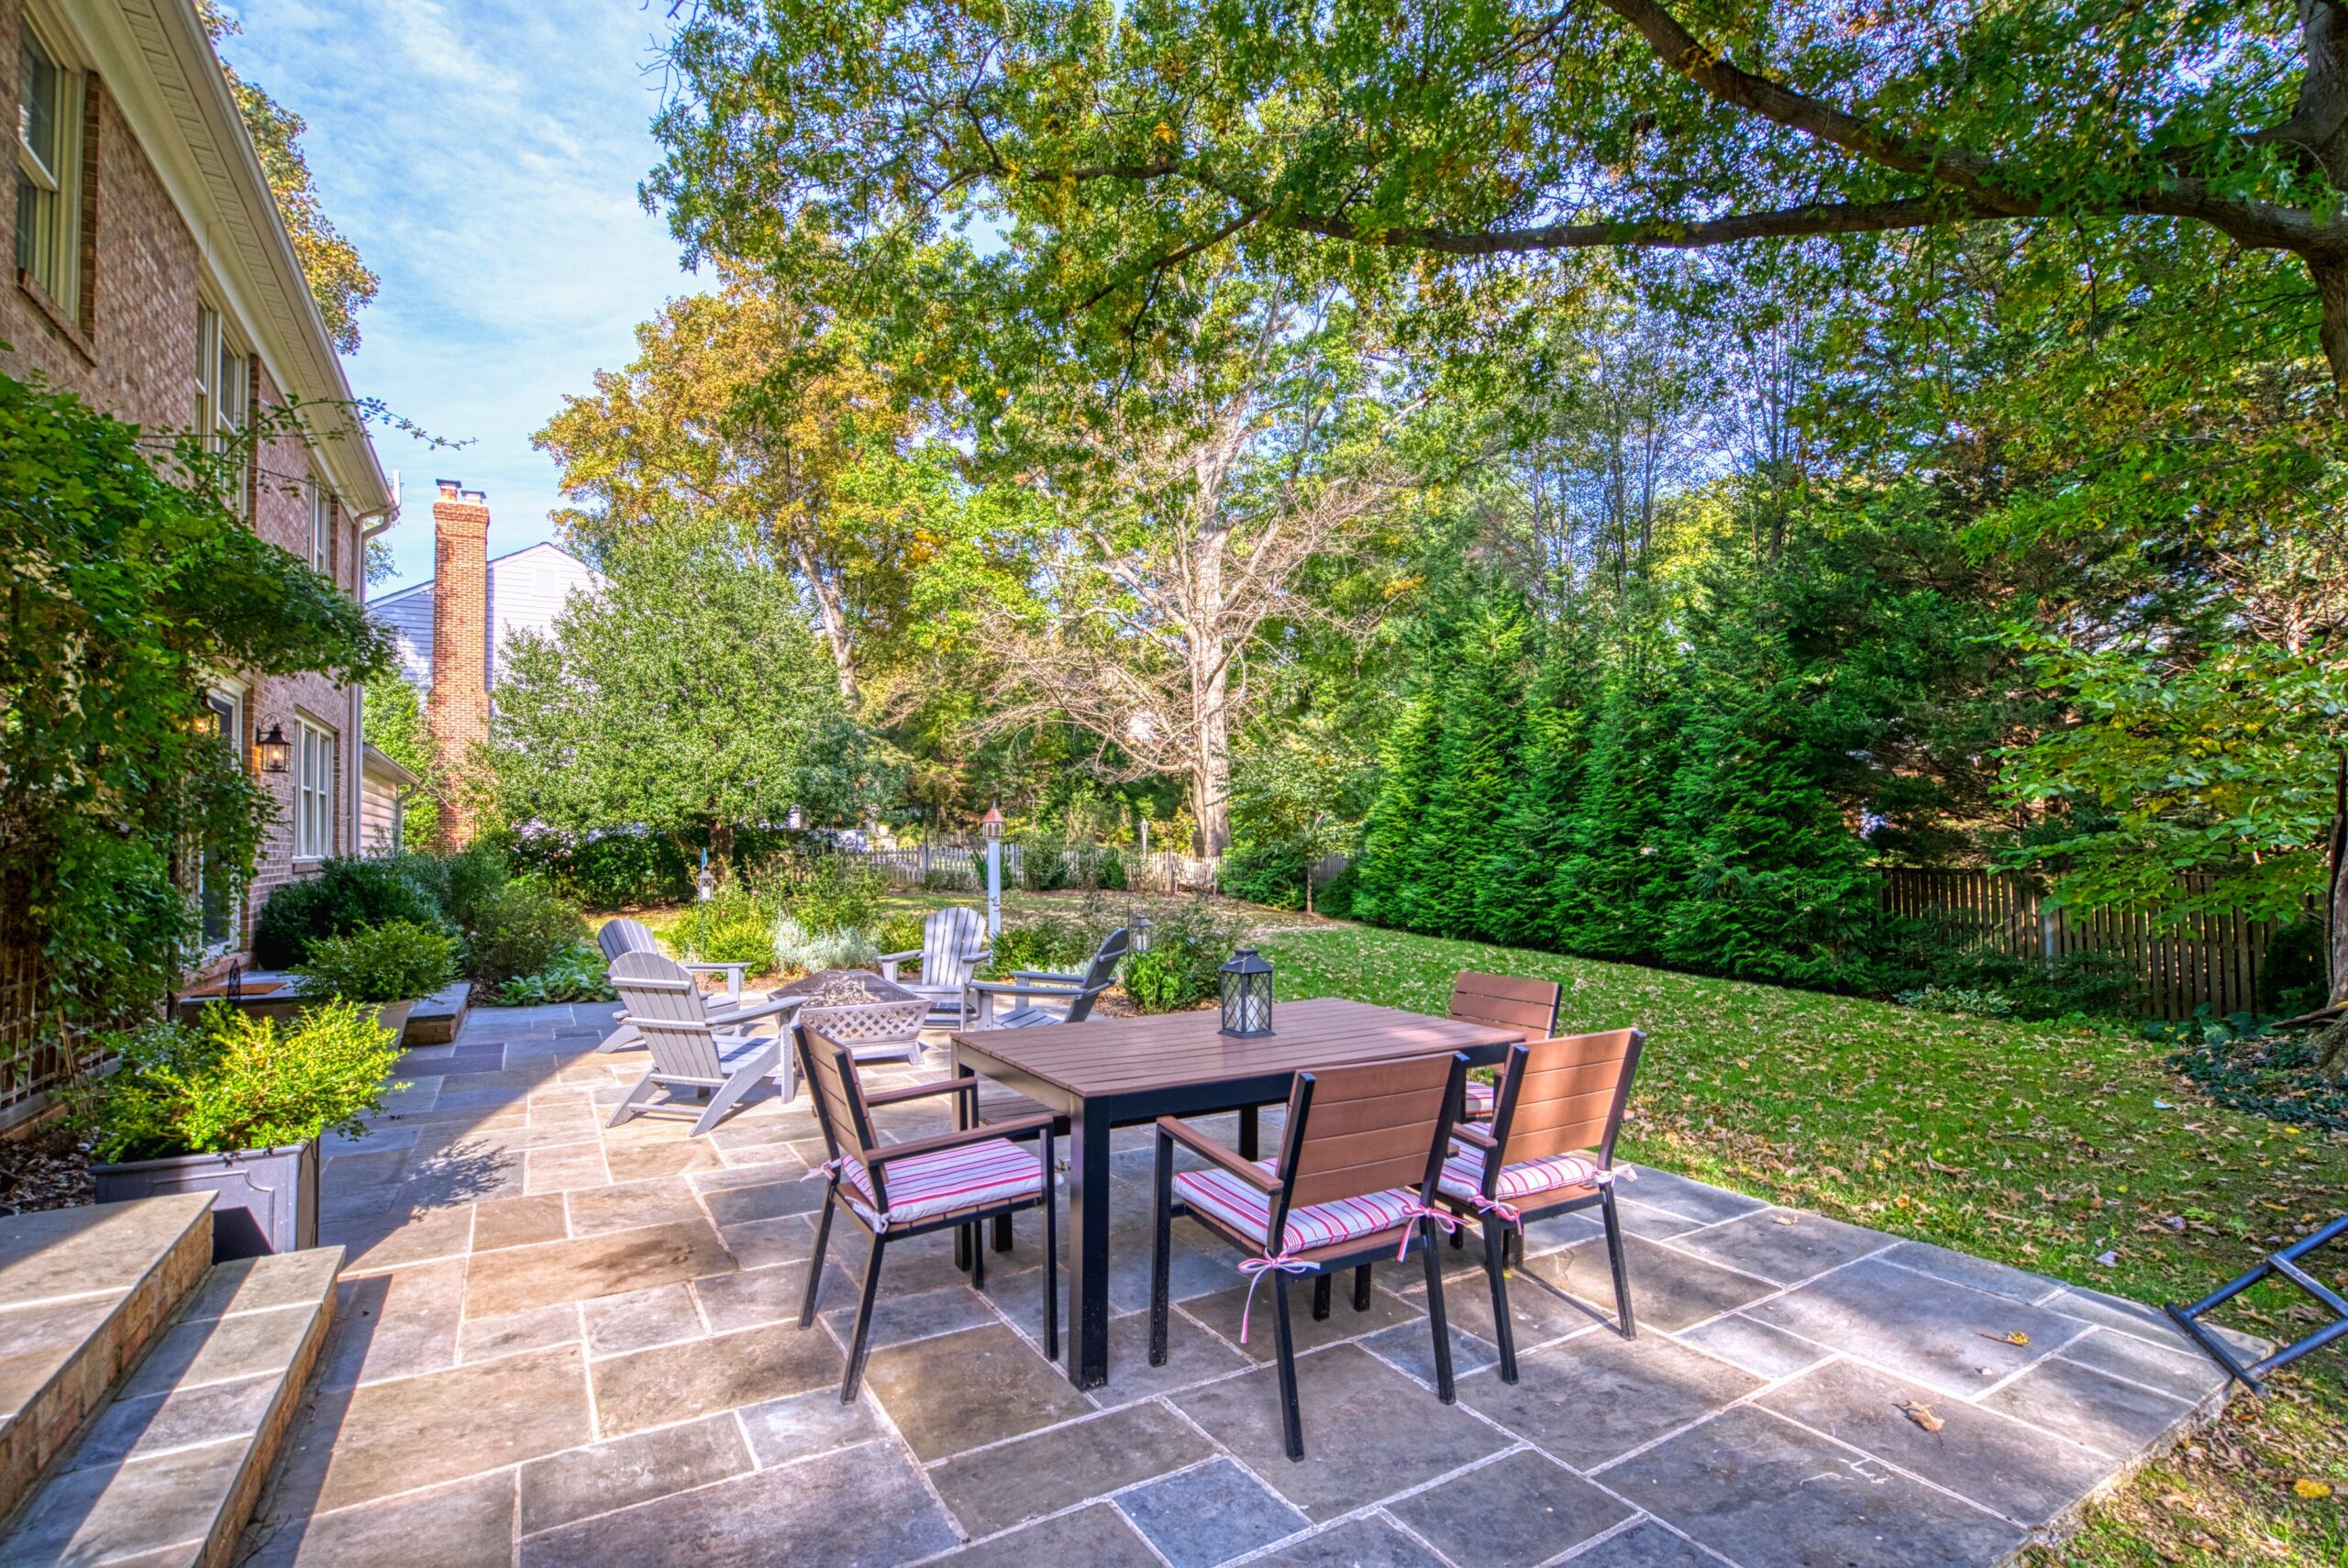 Professional exterior photo of 8305 River Falls Dr, Potomac, MD - rear shot showing most of large patio with 2 sets of patio furniture behind the red brick home, and the flat backyard